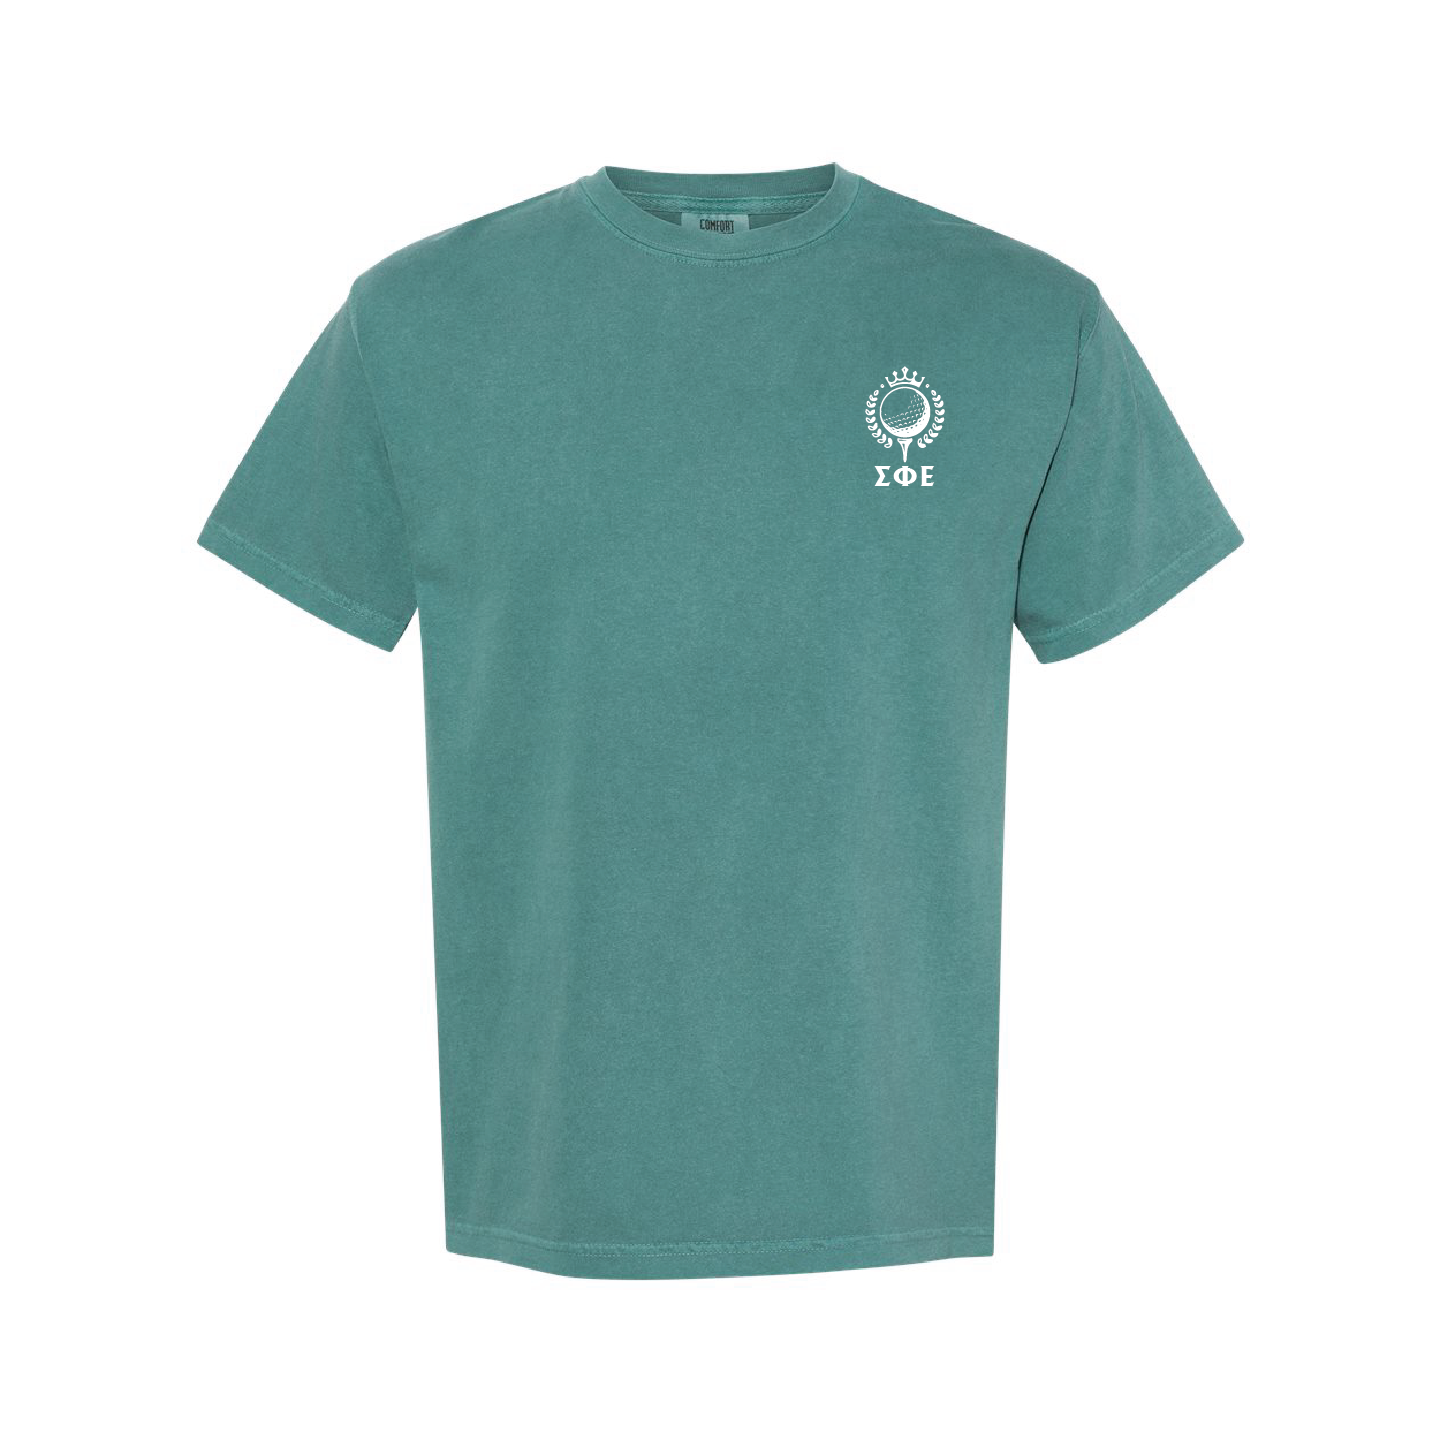 LIMITED RELEASE: SigEp Golf T-Shirt